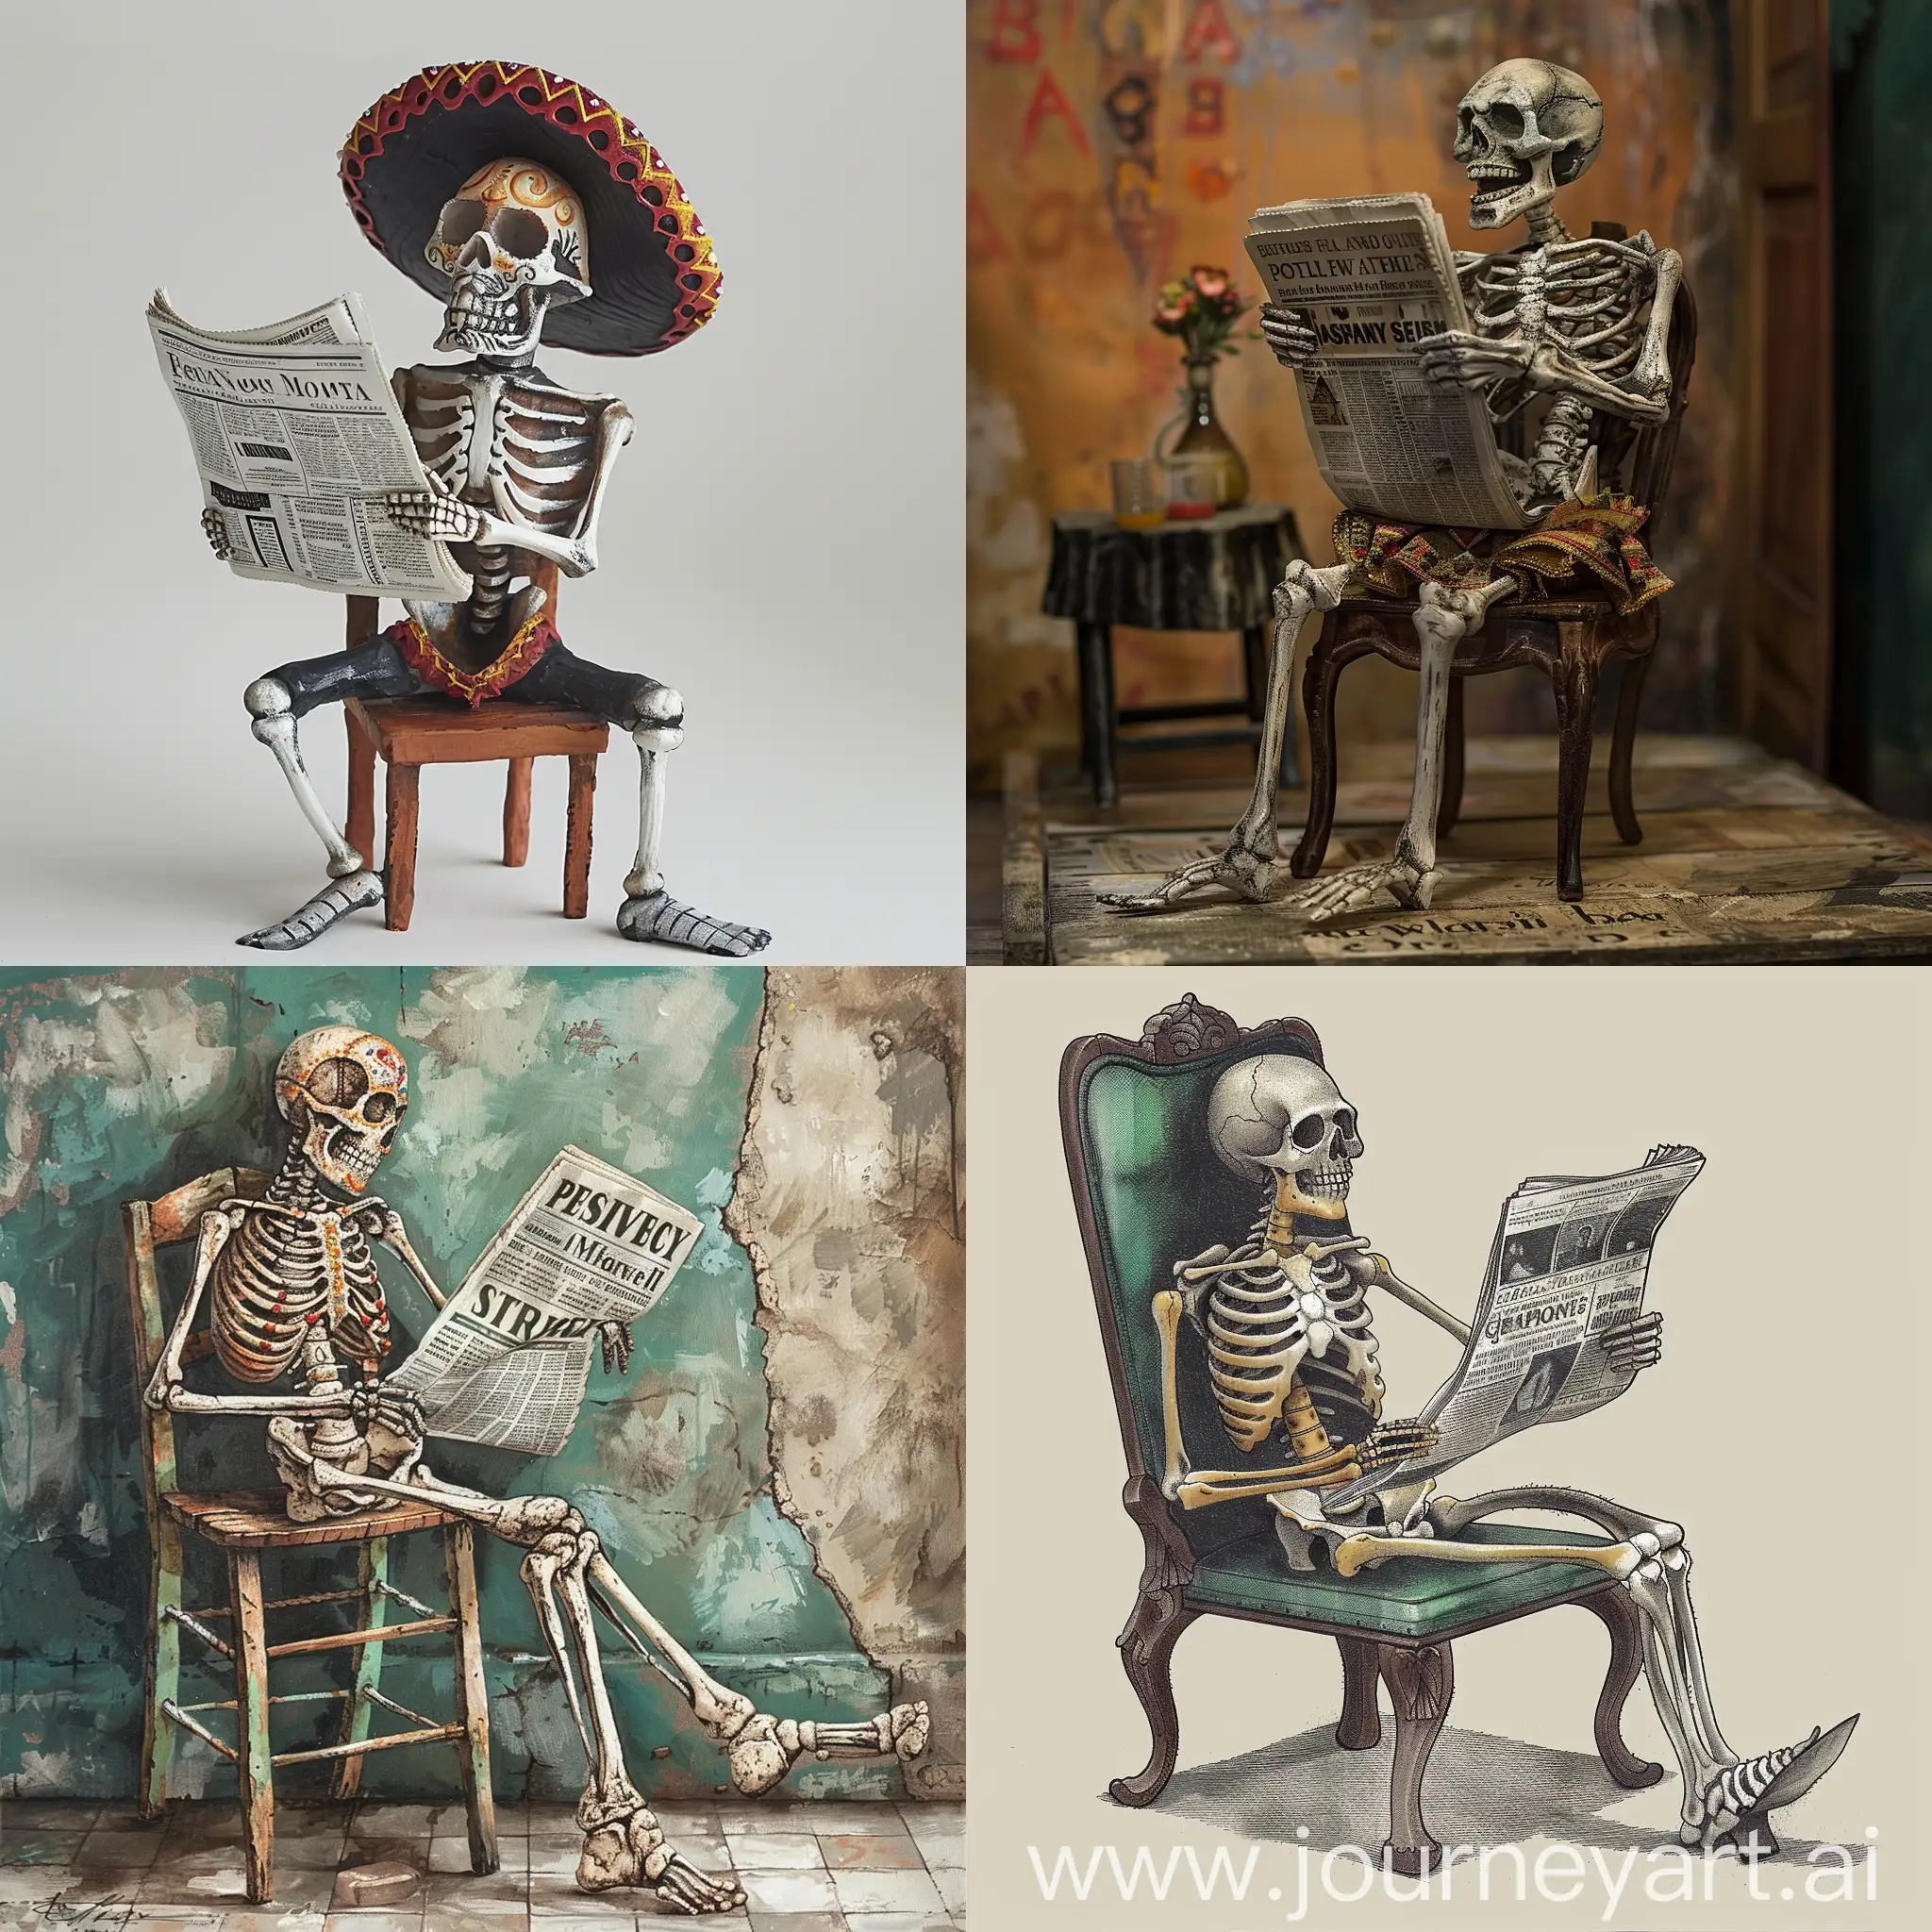 A mexican skeleton man sitting on chair and reading news paper